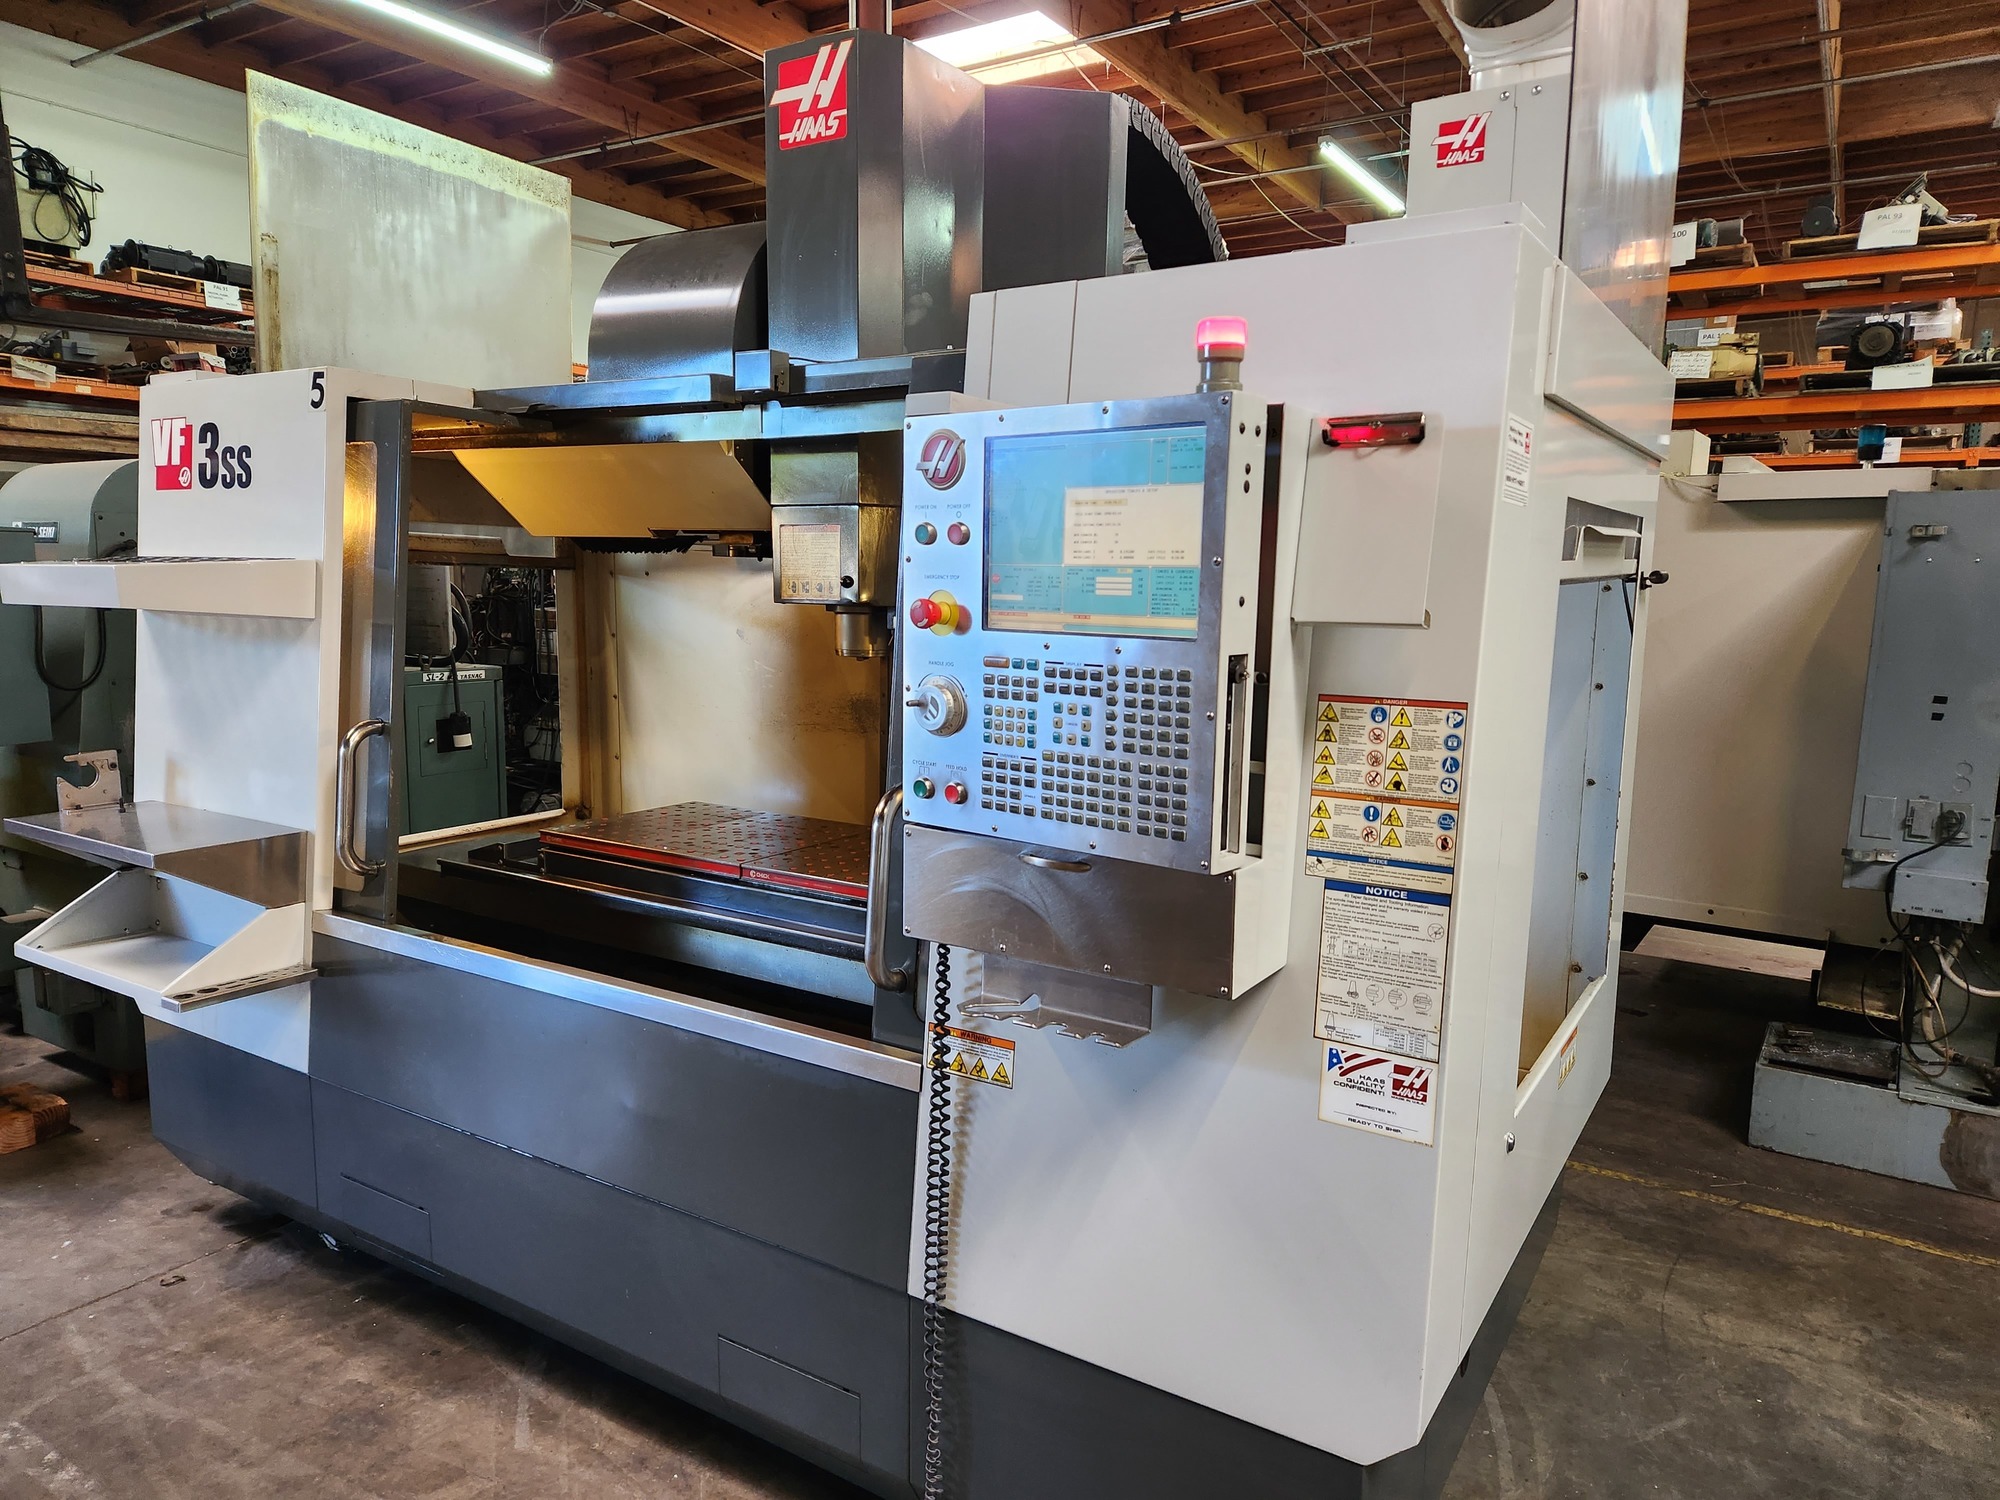 2010 HAAS VF-3SS Vertical Machining Centers | SMS Engineering